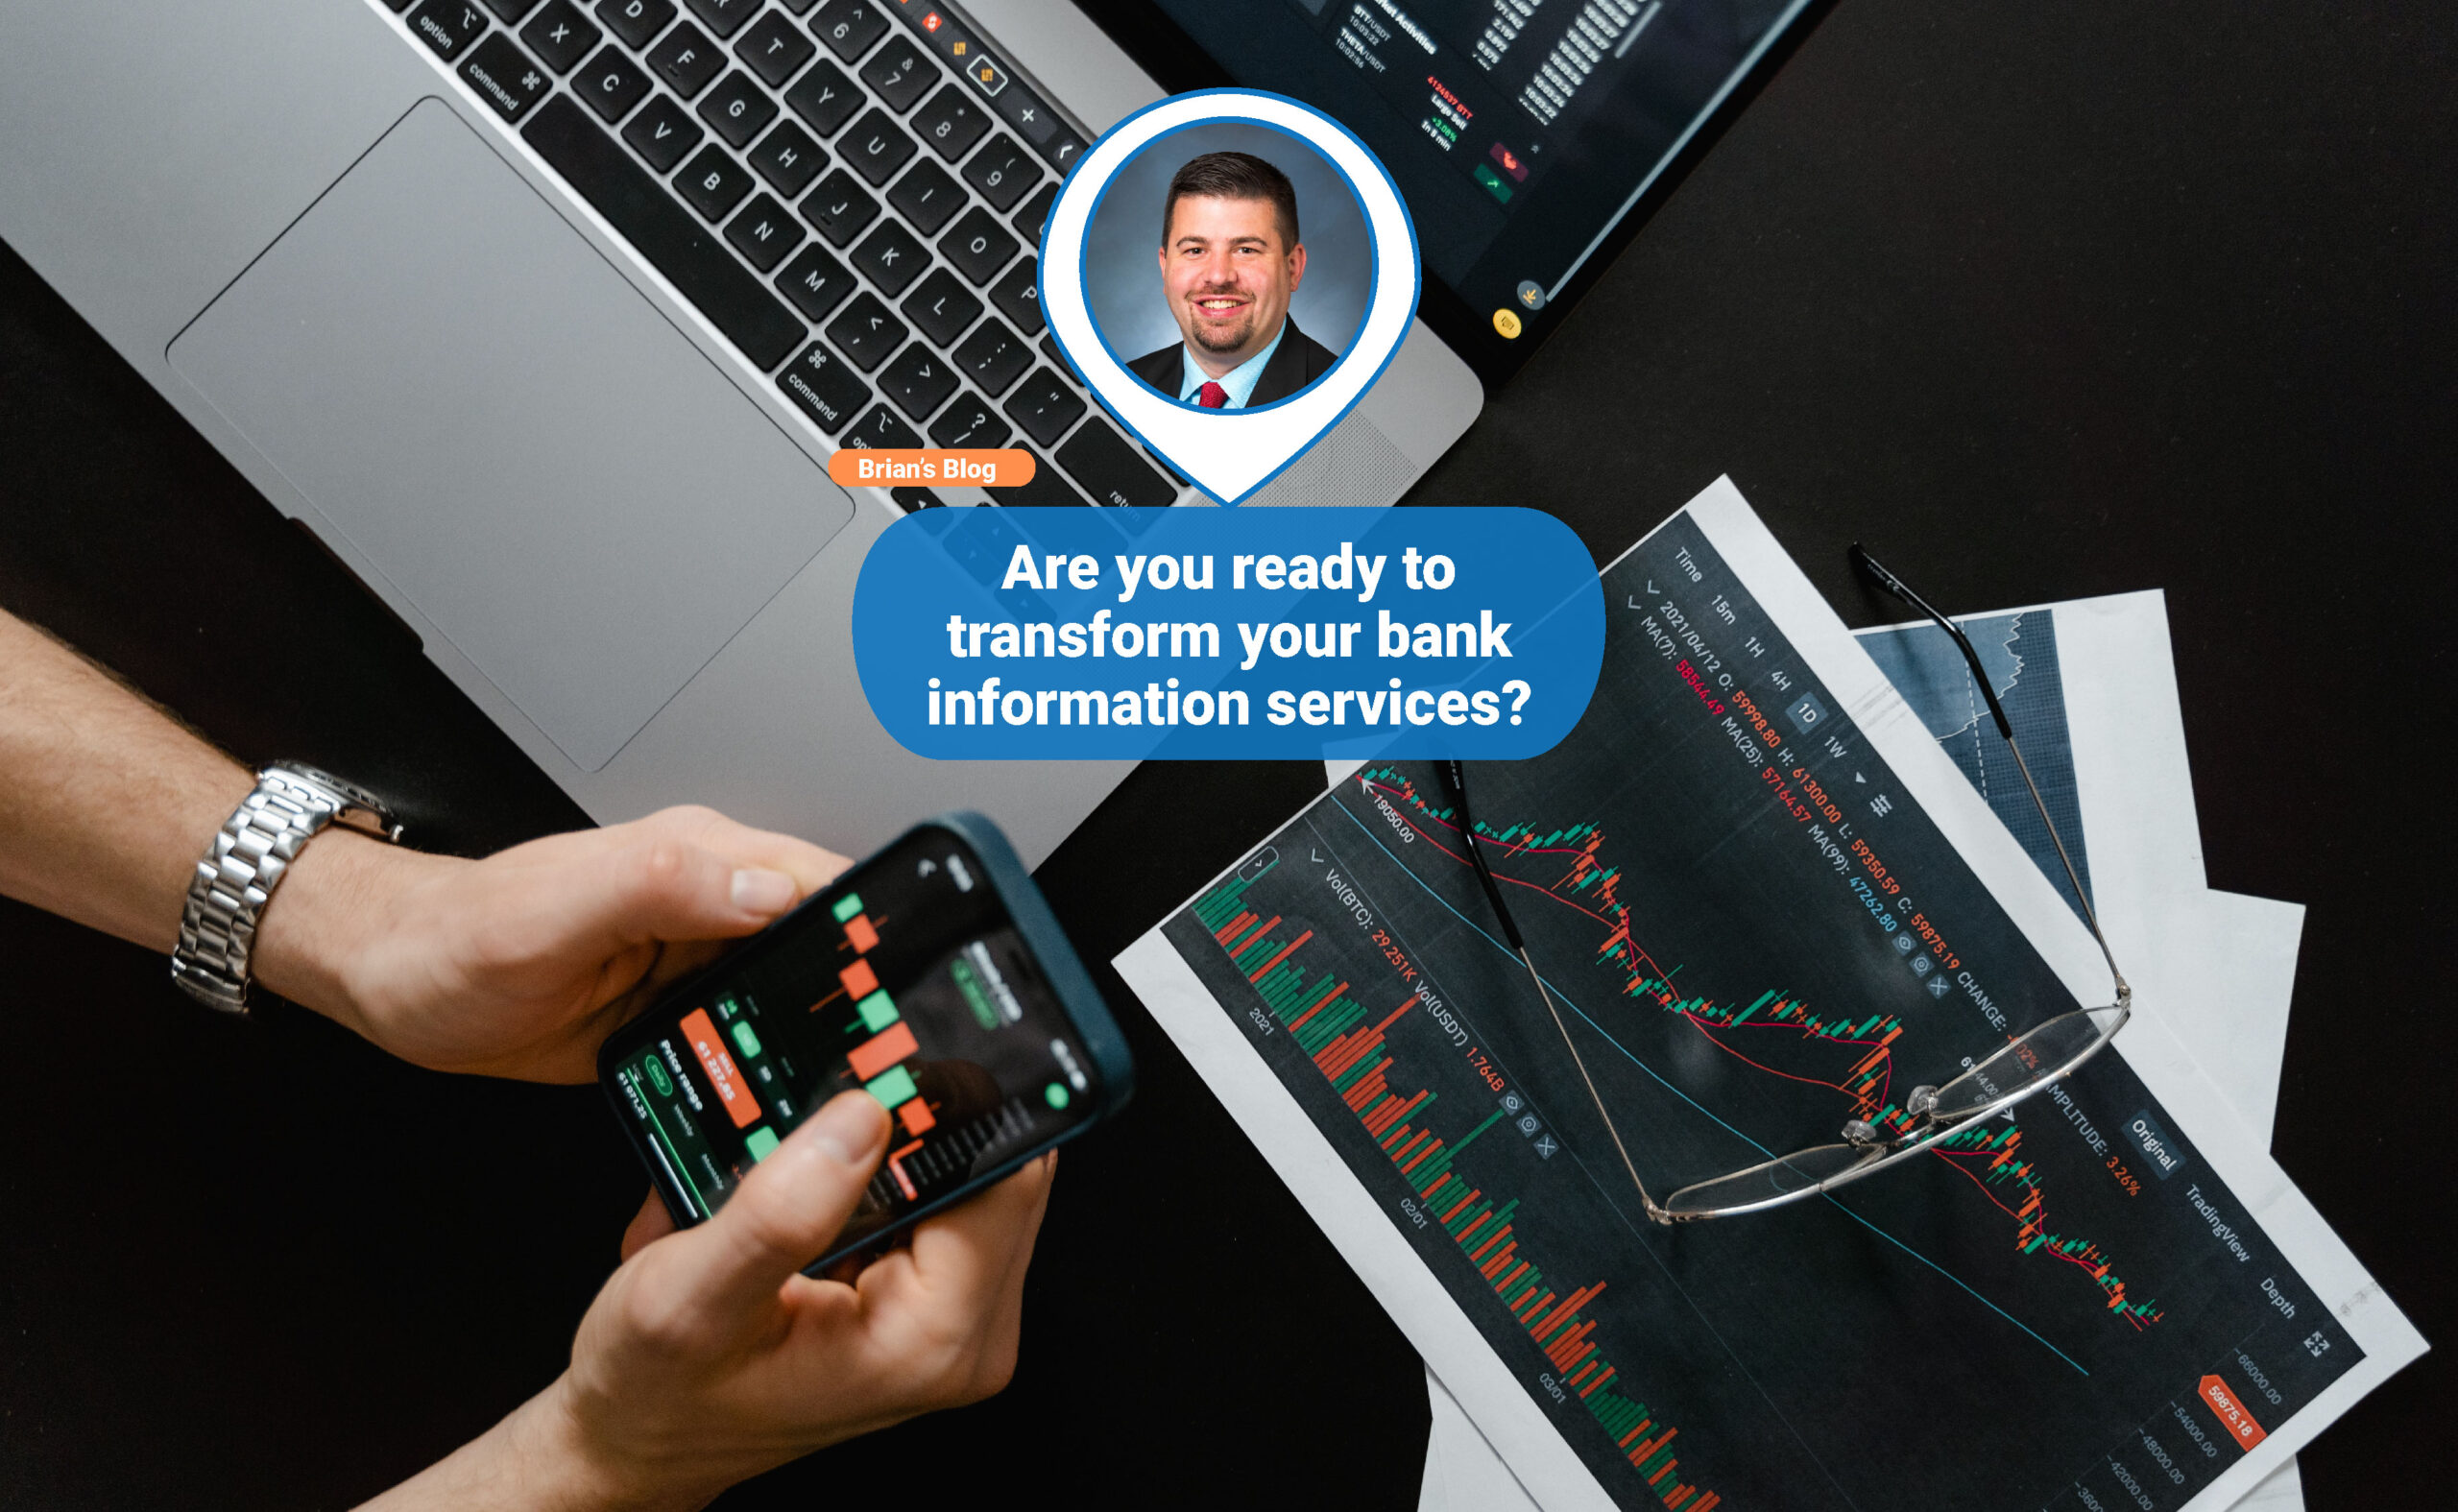 Are you ready to transform your bank information services?